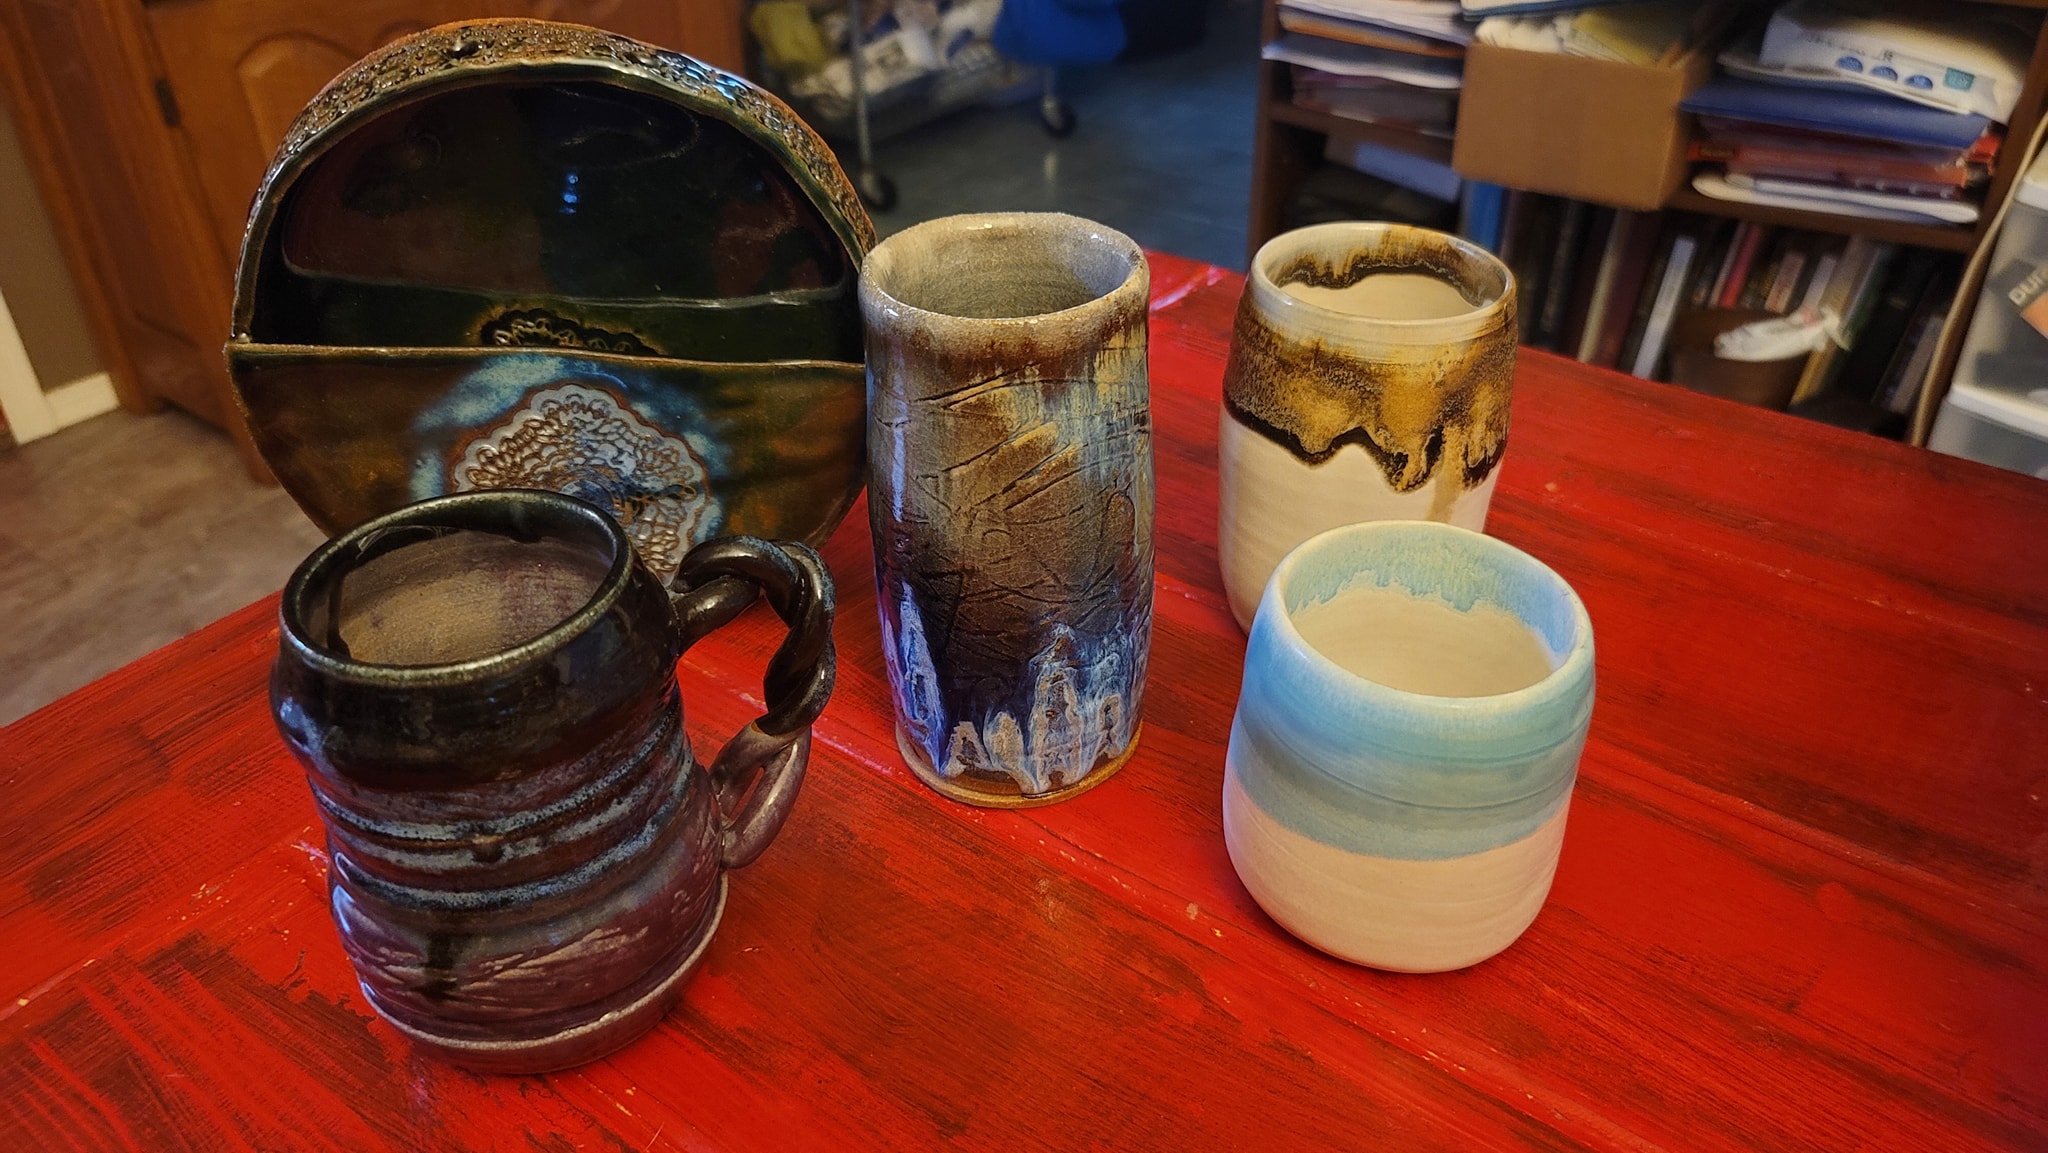 We love collecting local handmade crafts and art! Found this potter at Southside